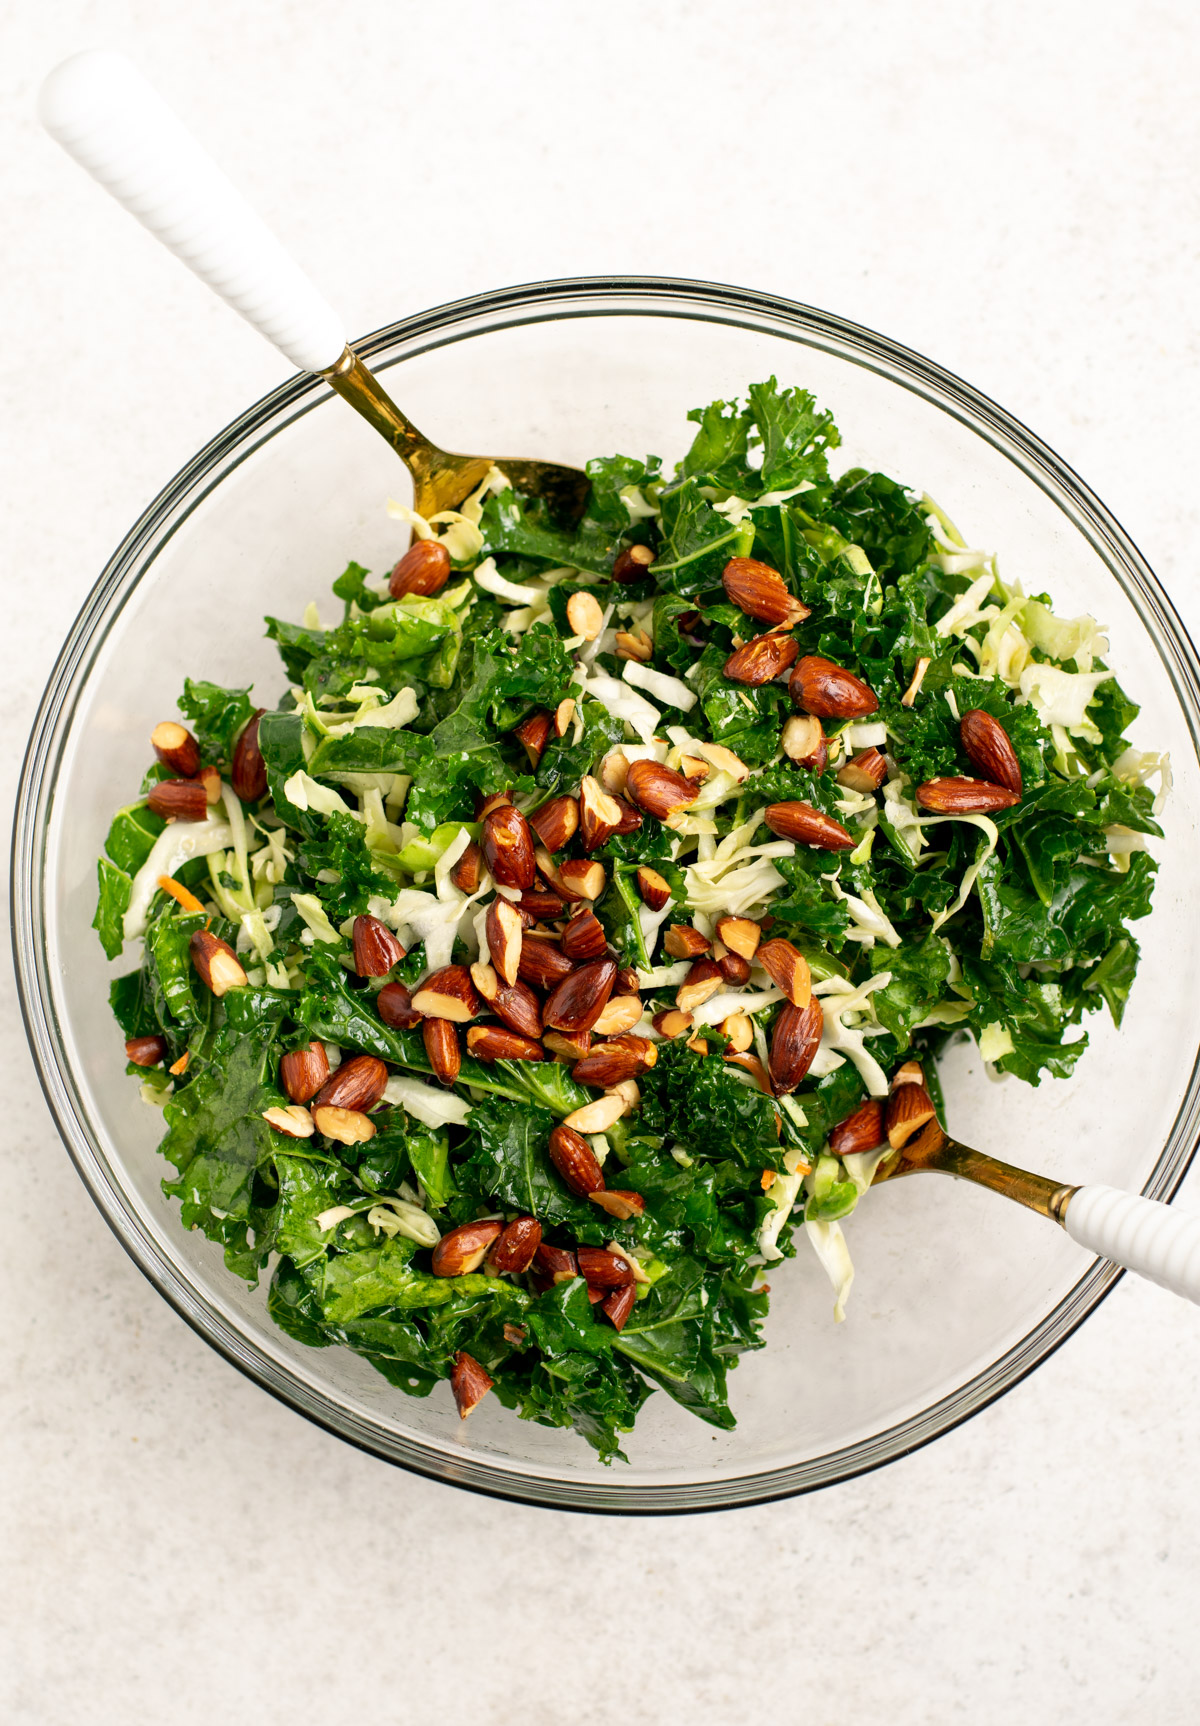 top view of a kale salad in a glass bowl with almonds on top and gold salad spoons.